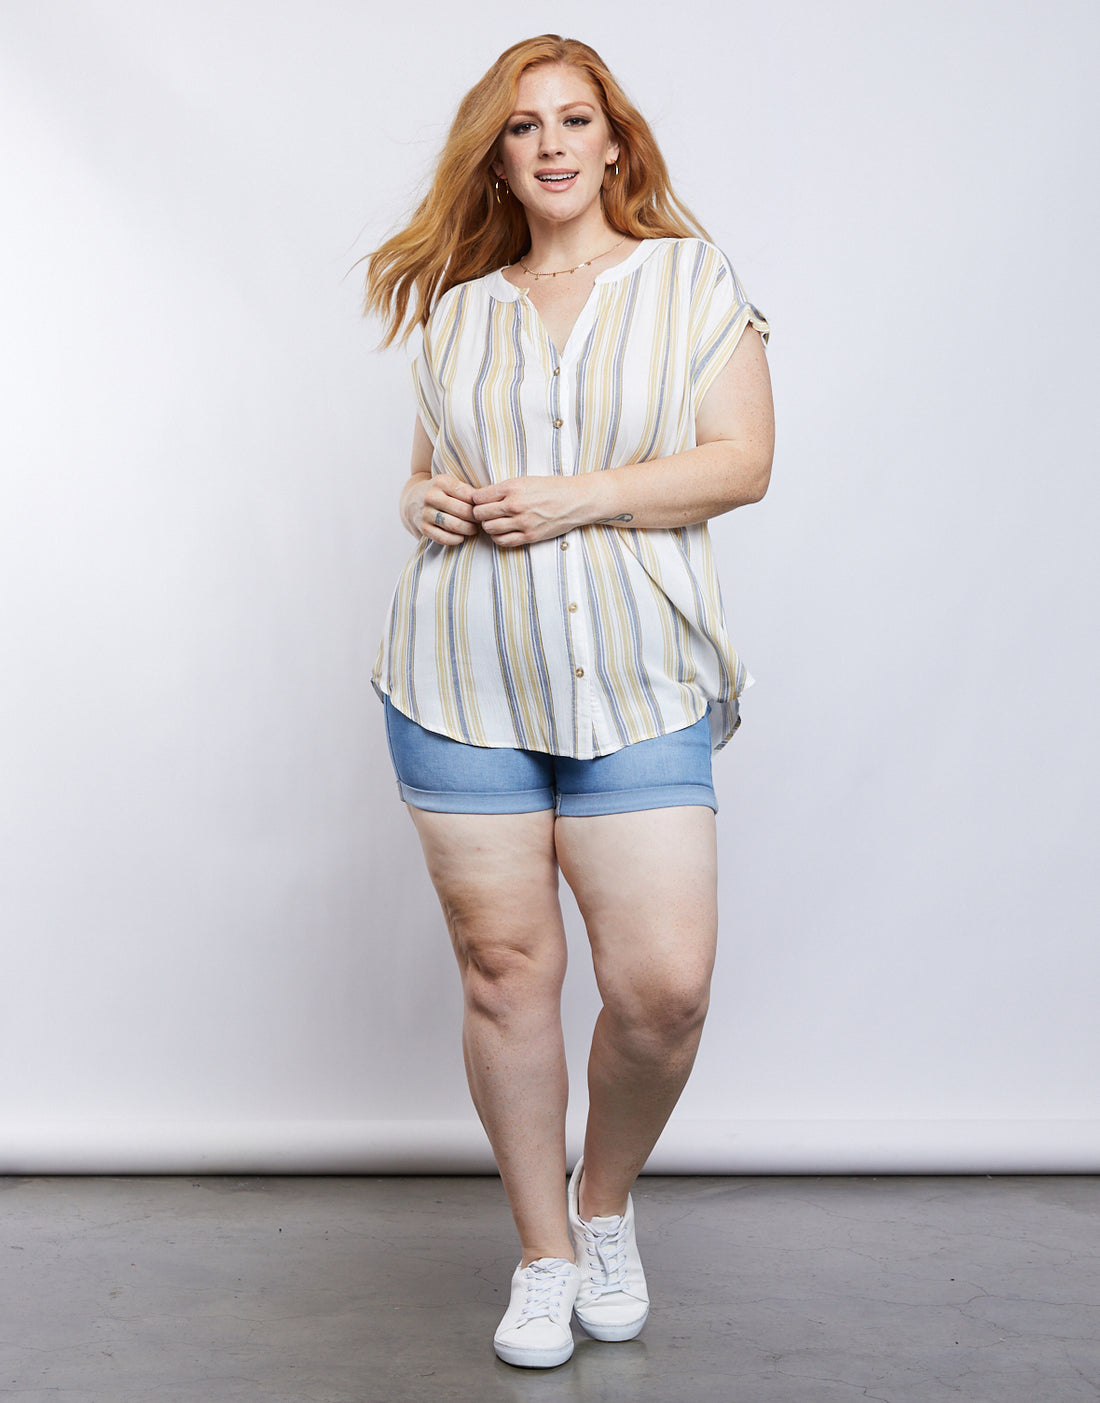 Curve Keep it Casual Top Plus Size Tops -2020AVE